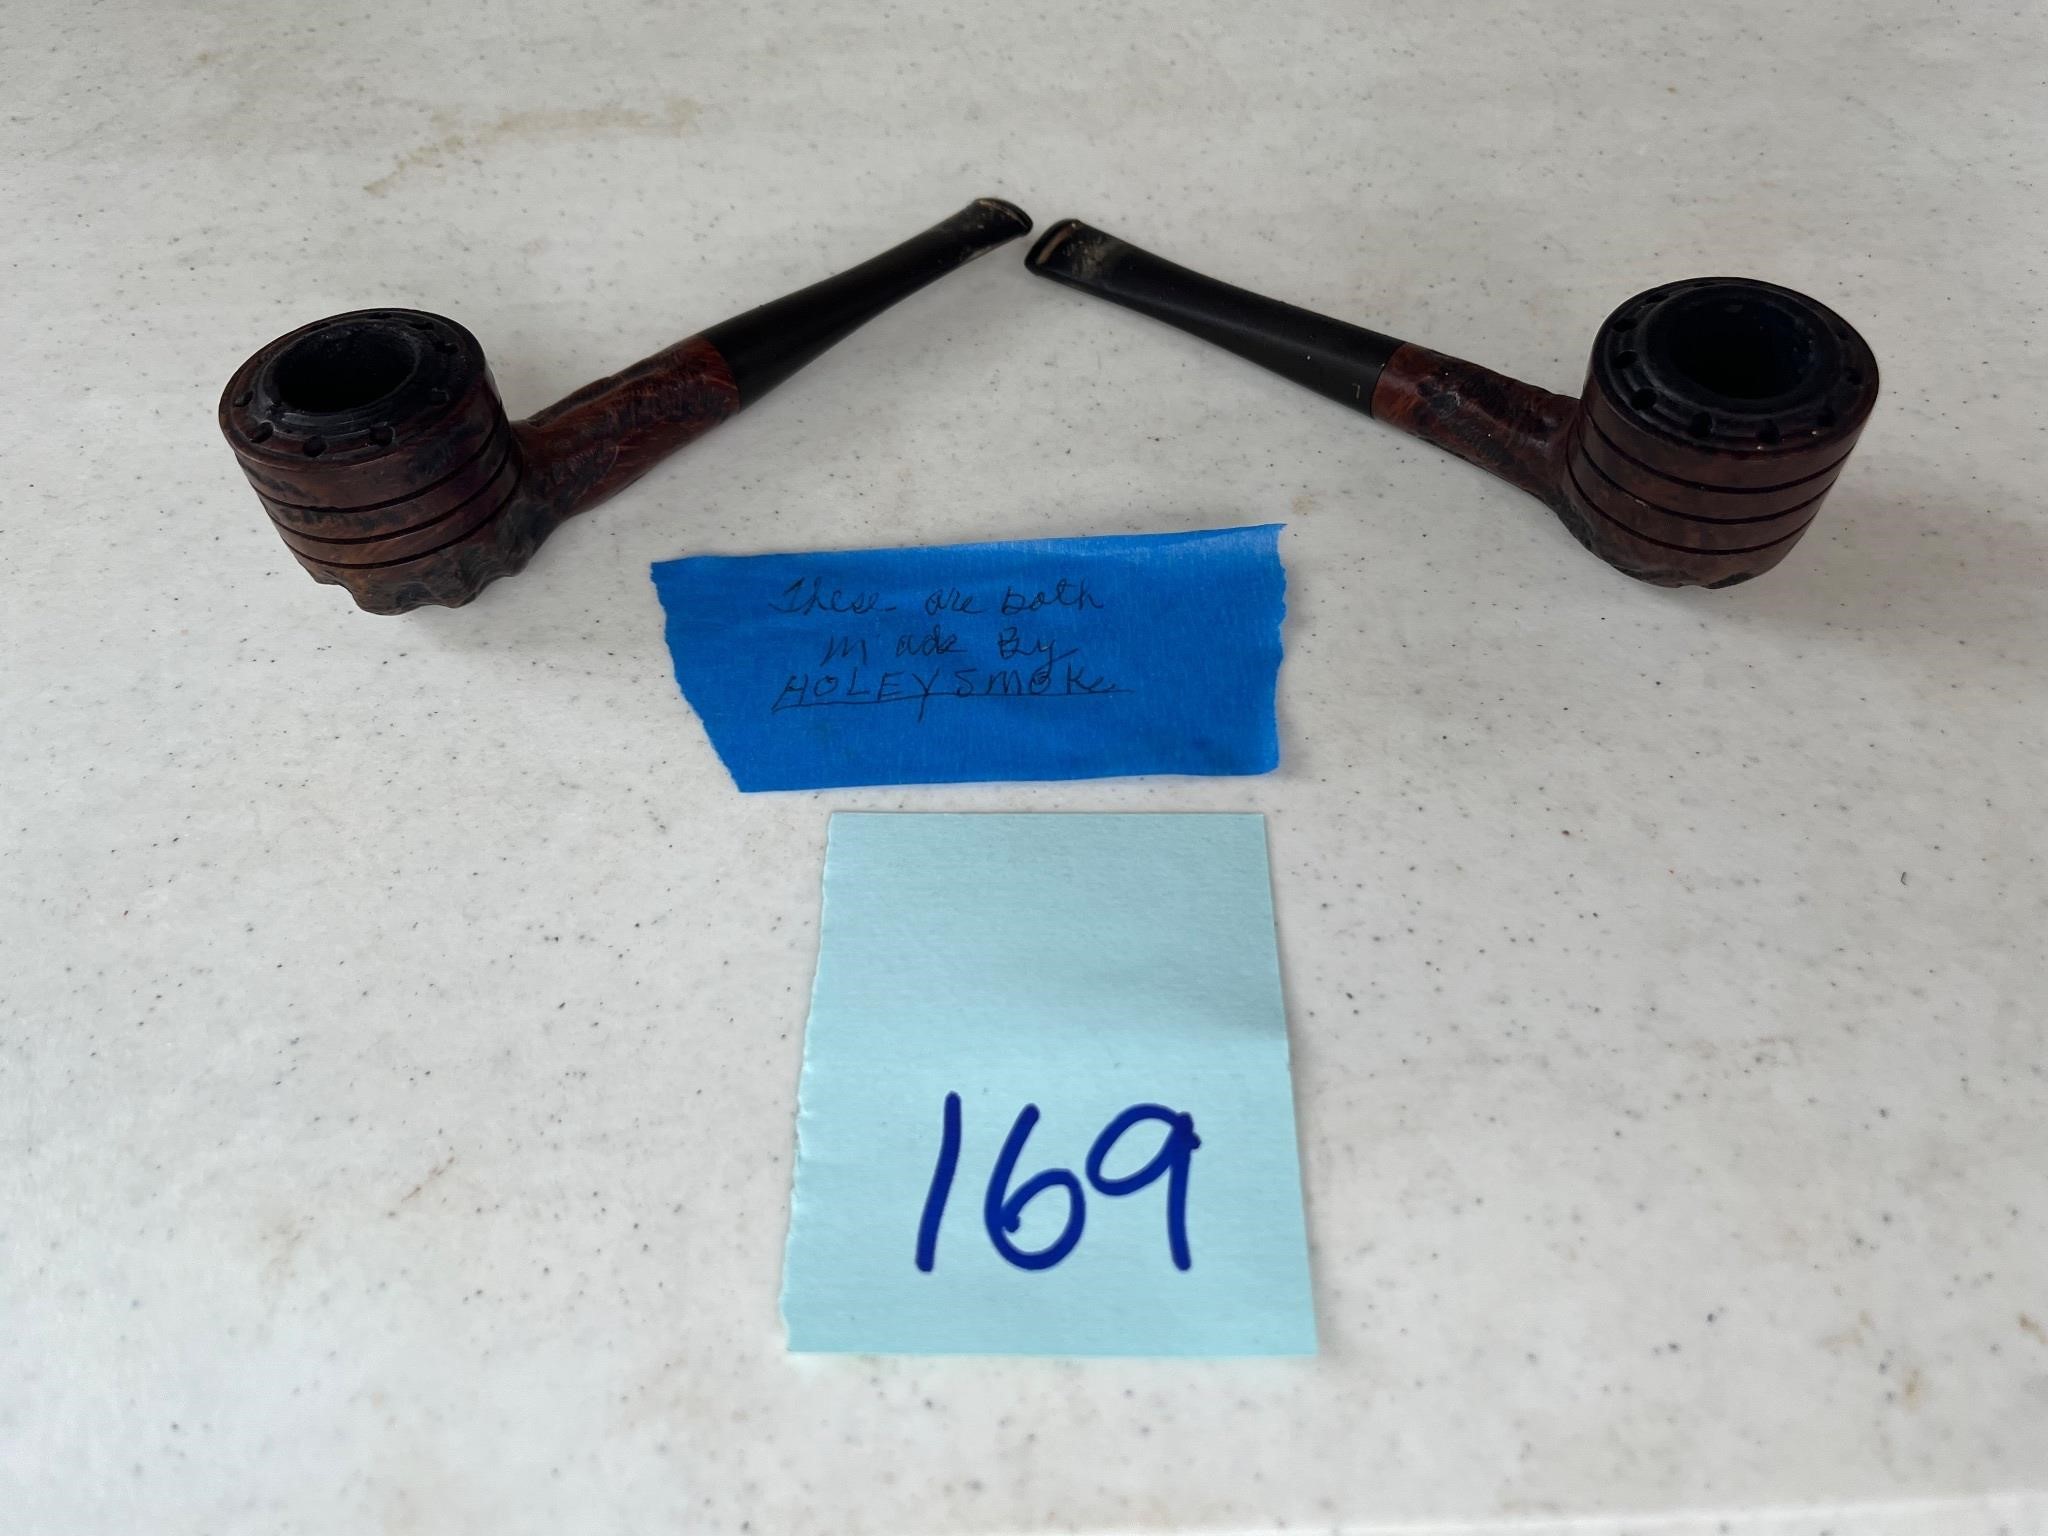 Two smoking tobacco pipes made by Holley Smoke